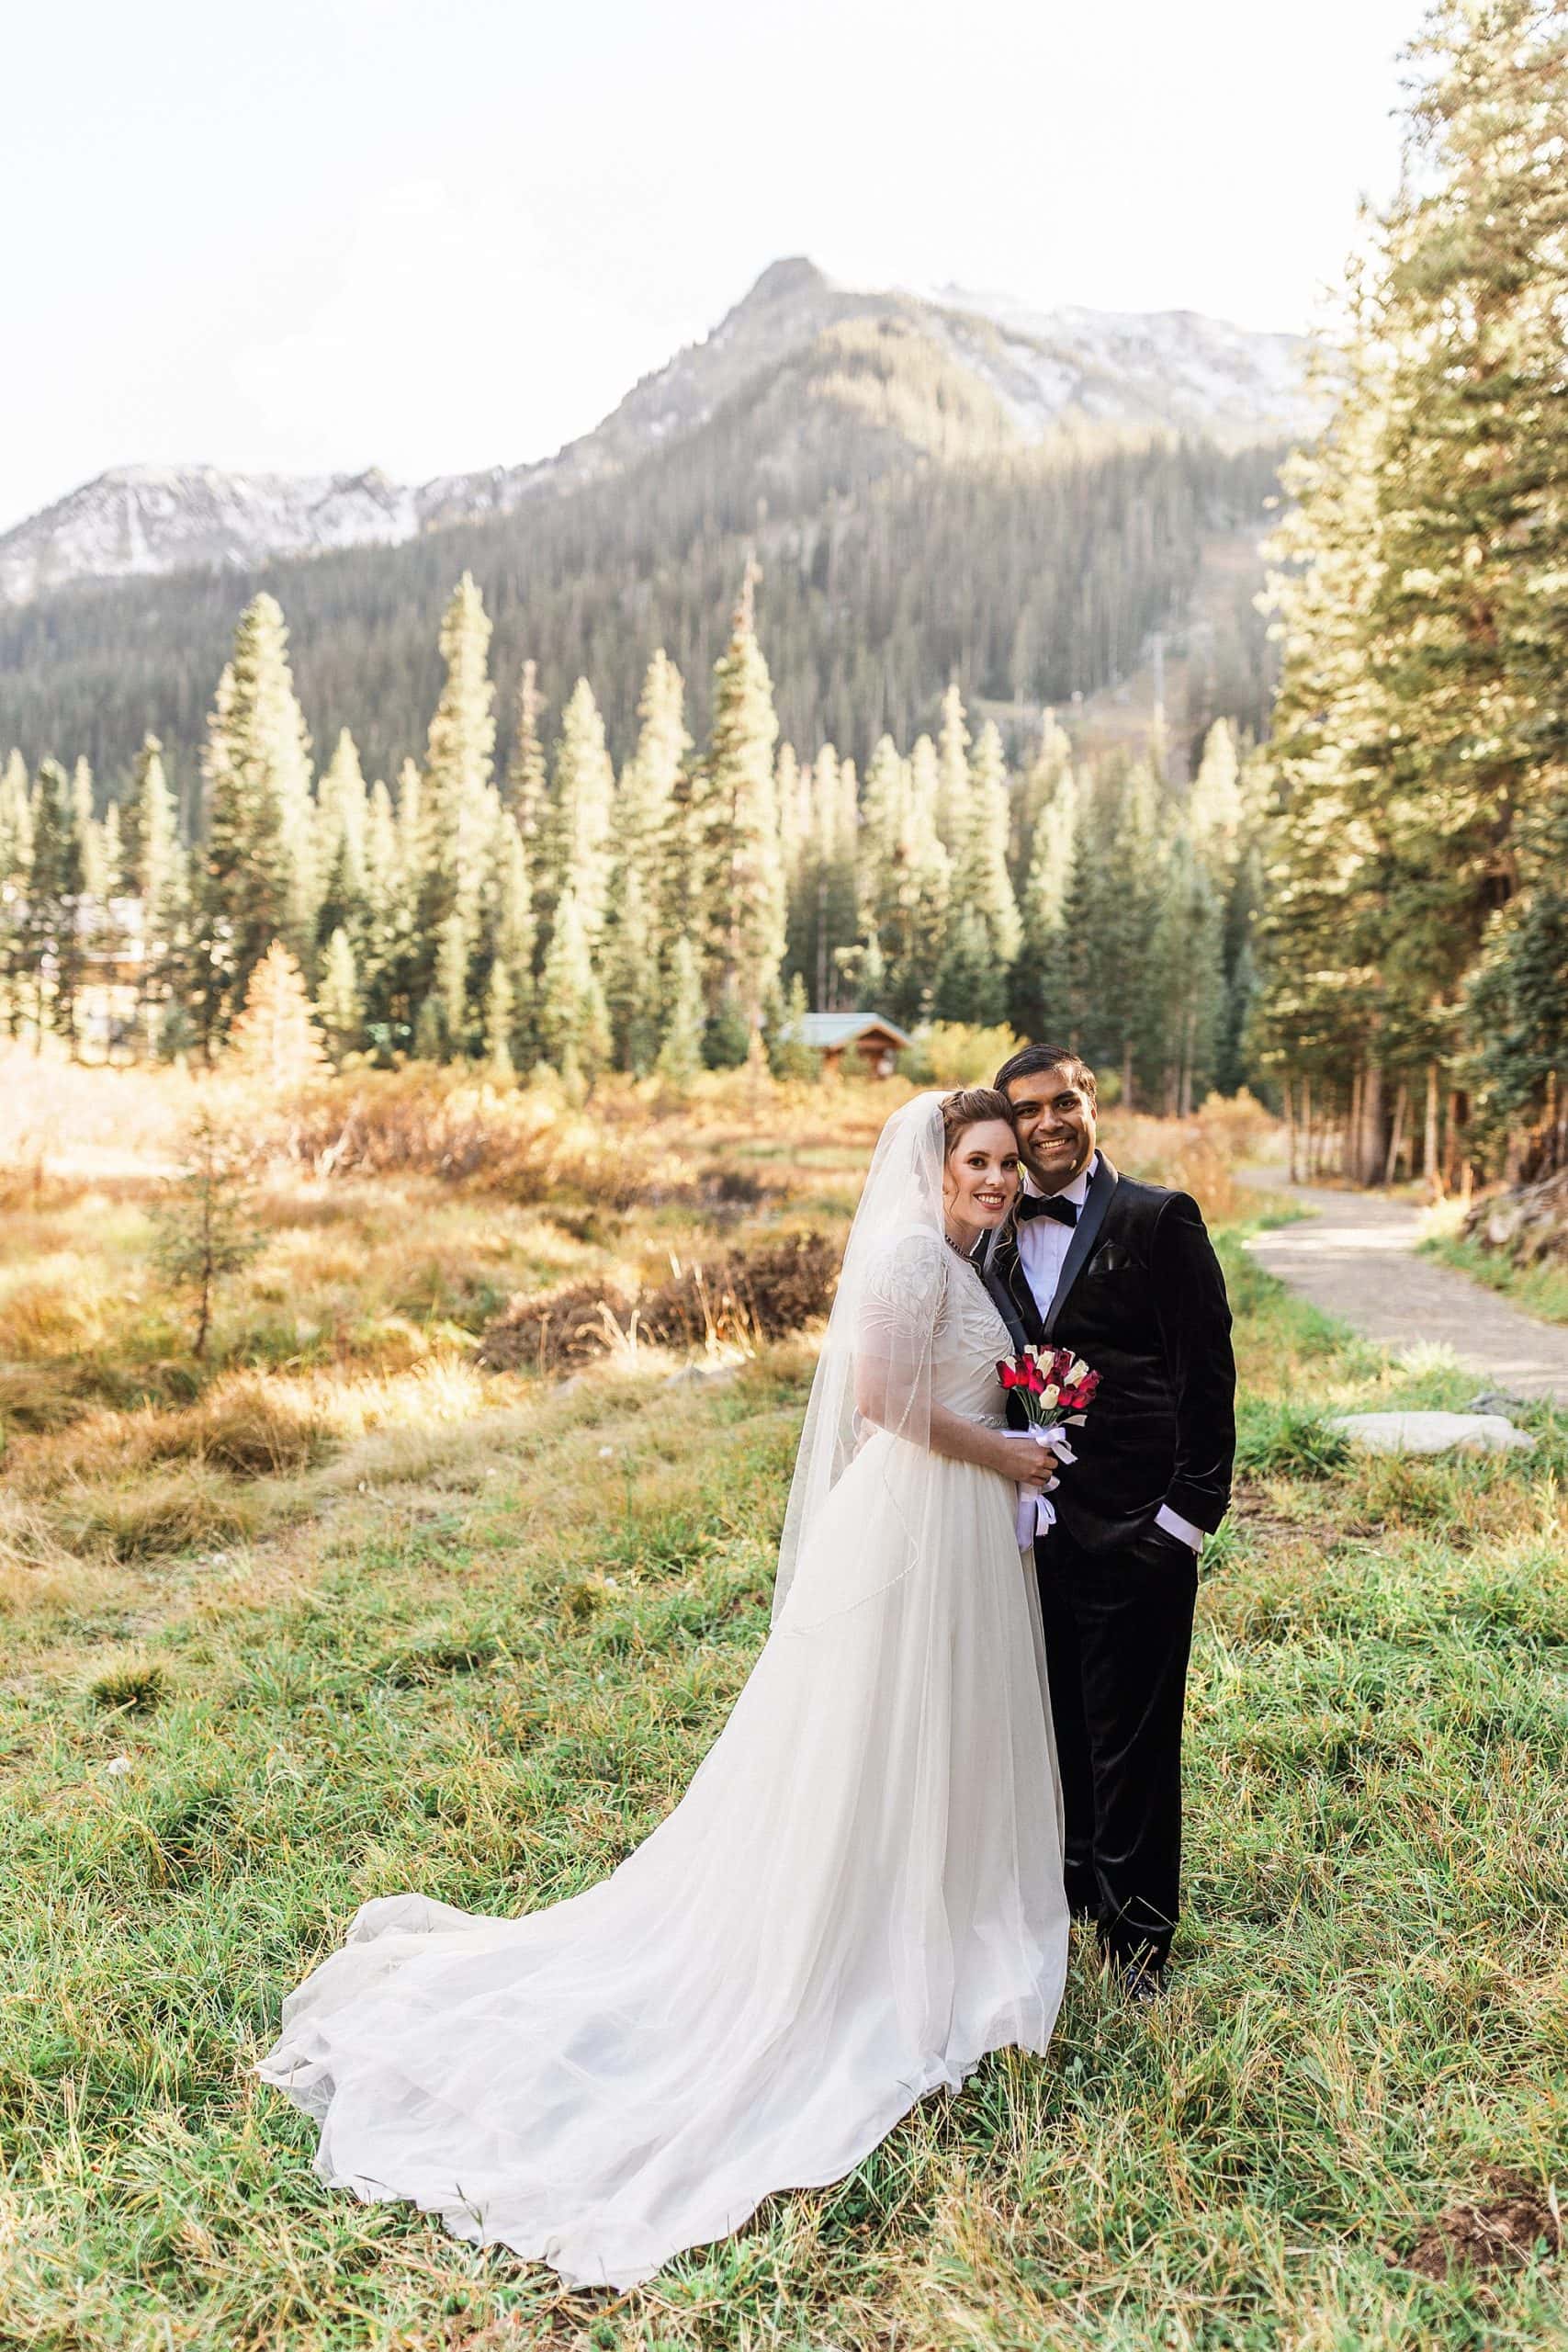 A bride and groom pose for the camera with a mountain in the background in Taos, New Mexico